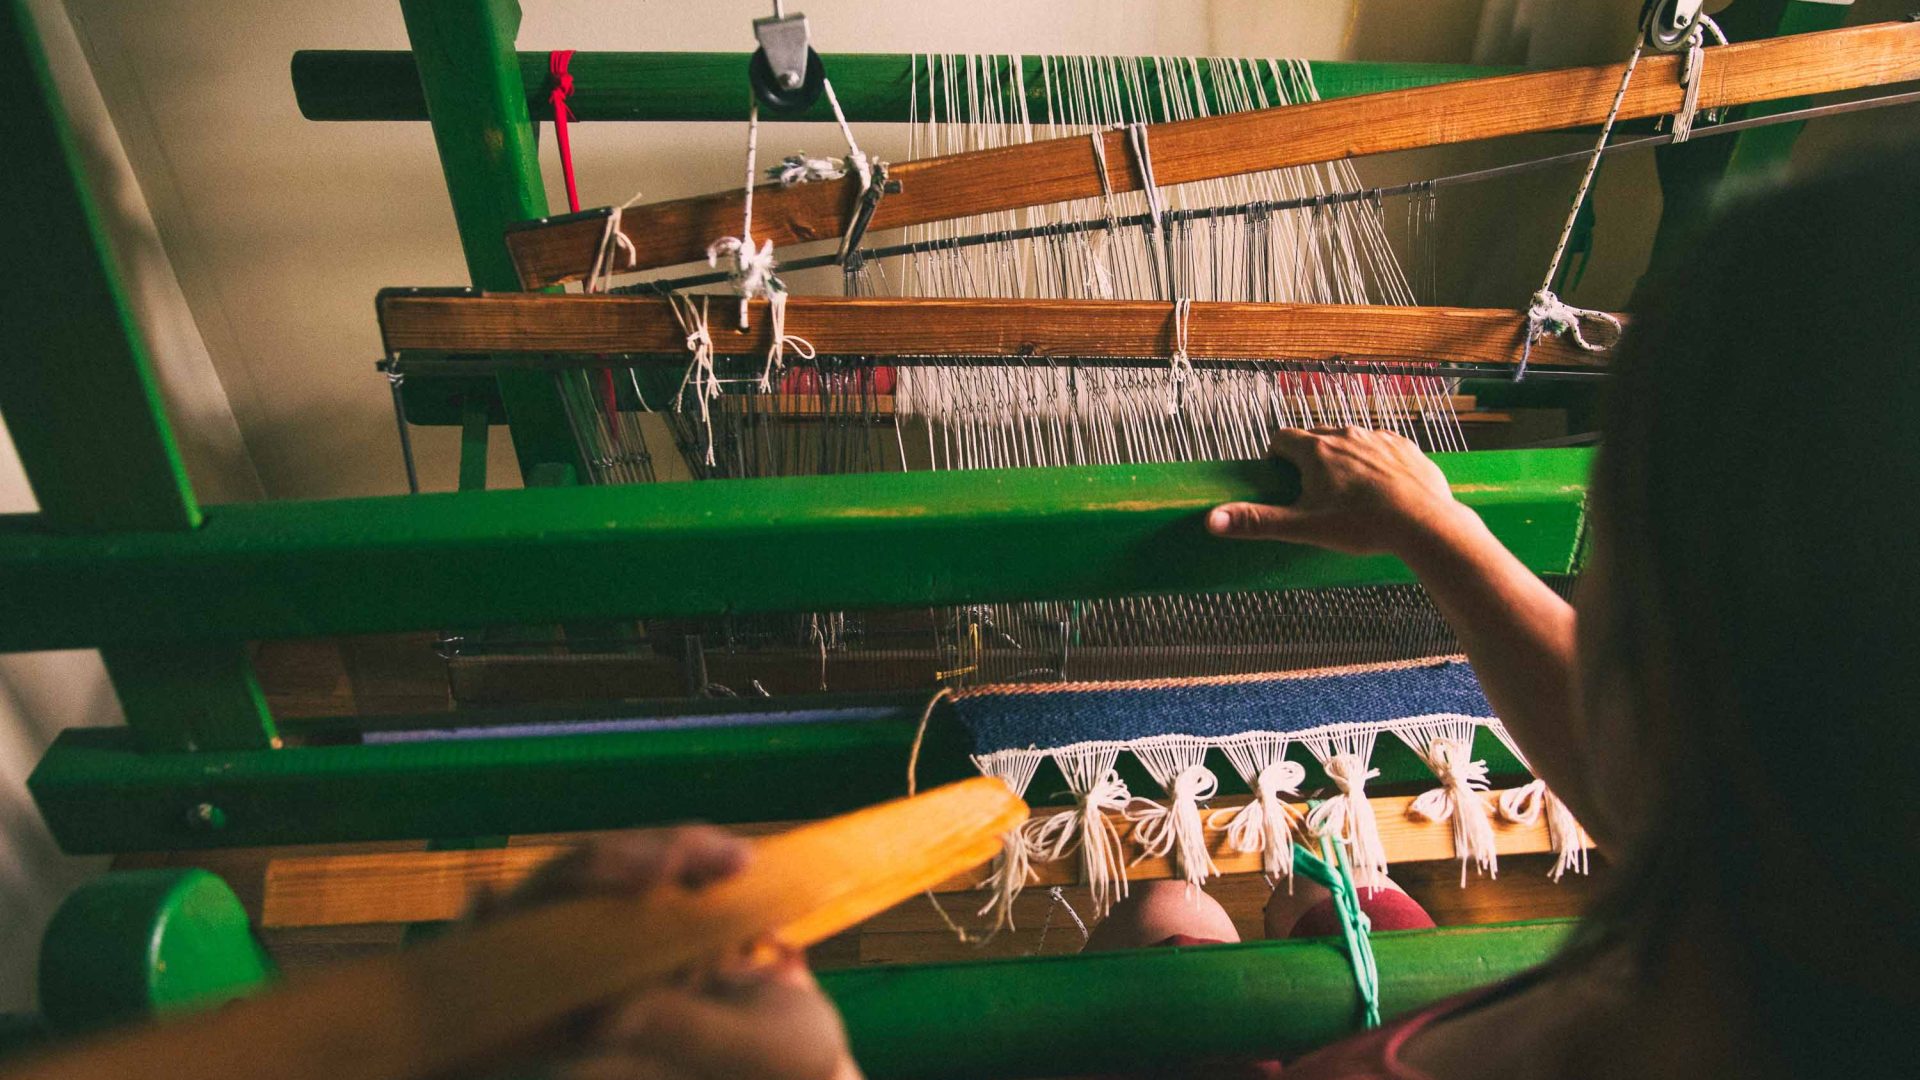 A wool loom with hands using it.